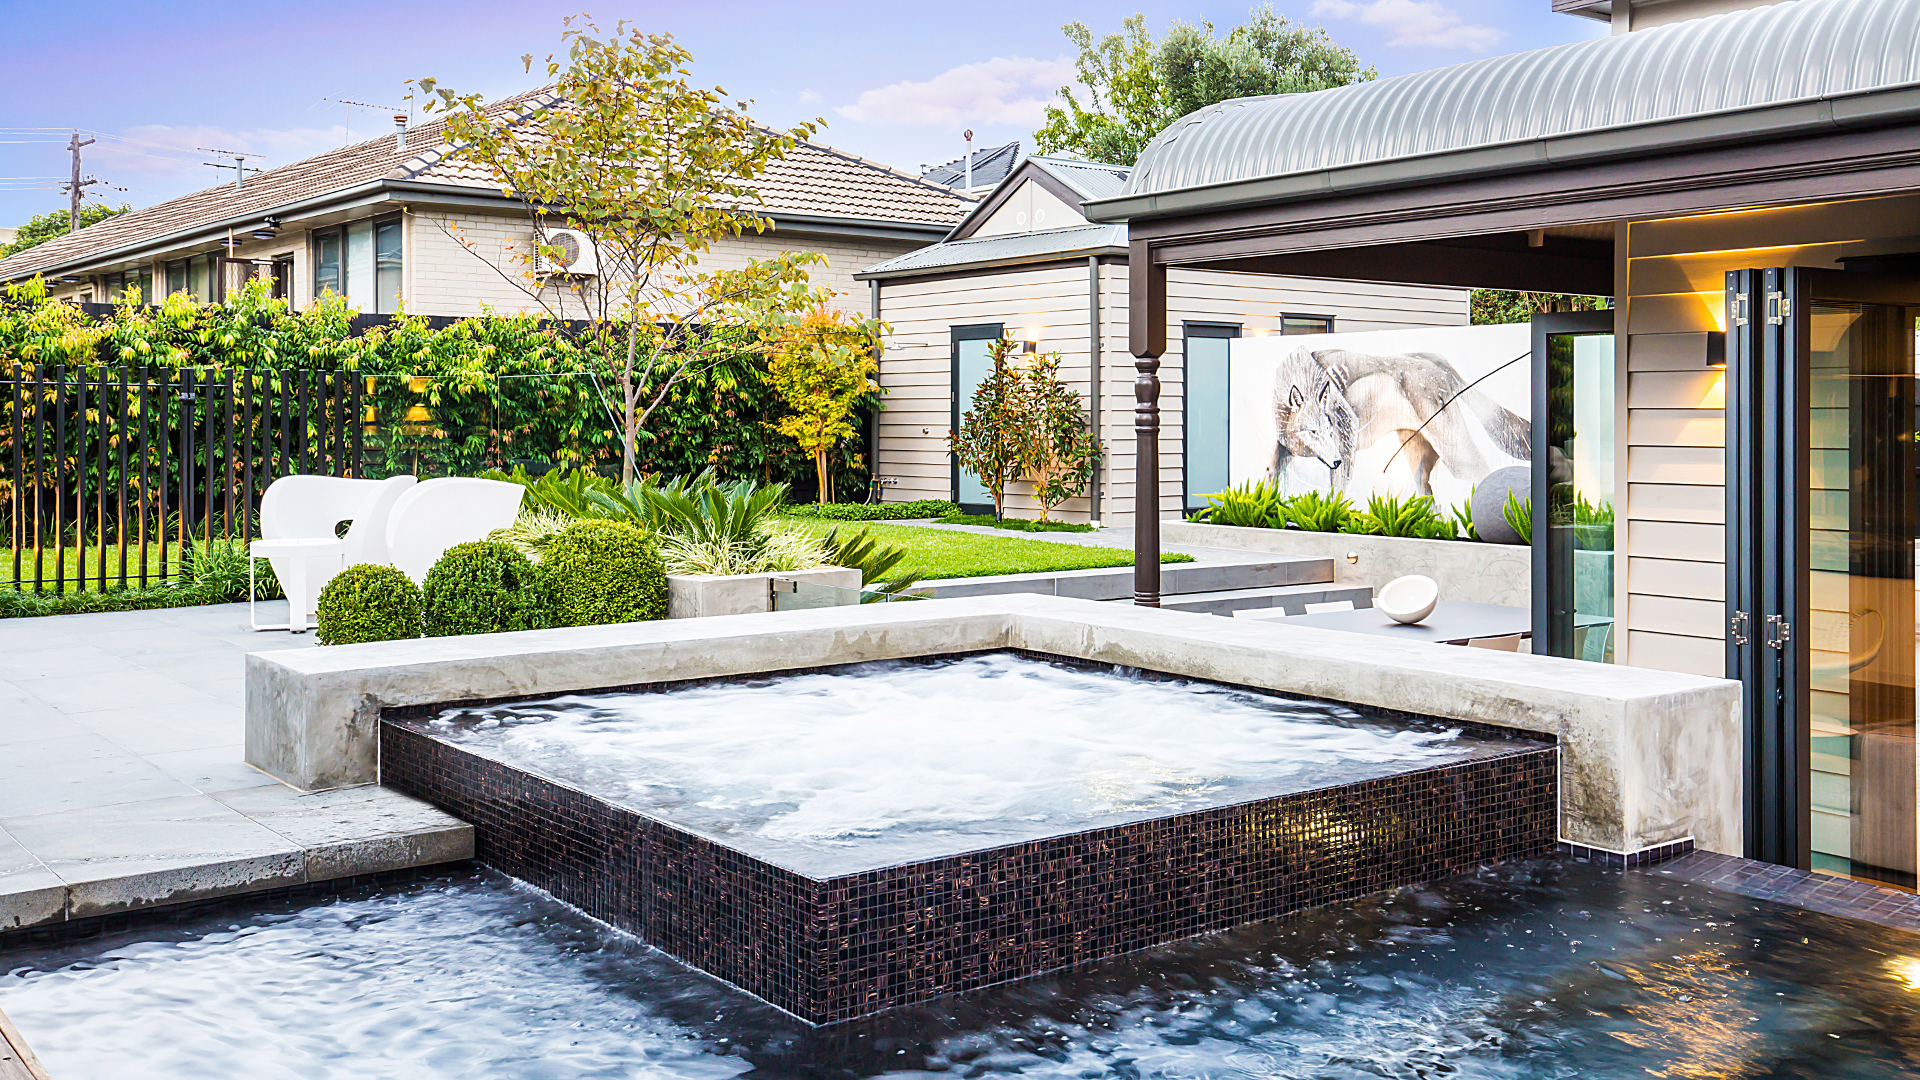 Close up shot of the spa design and construction at our project in Ascot Vale Melbourne.